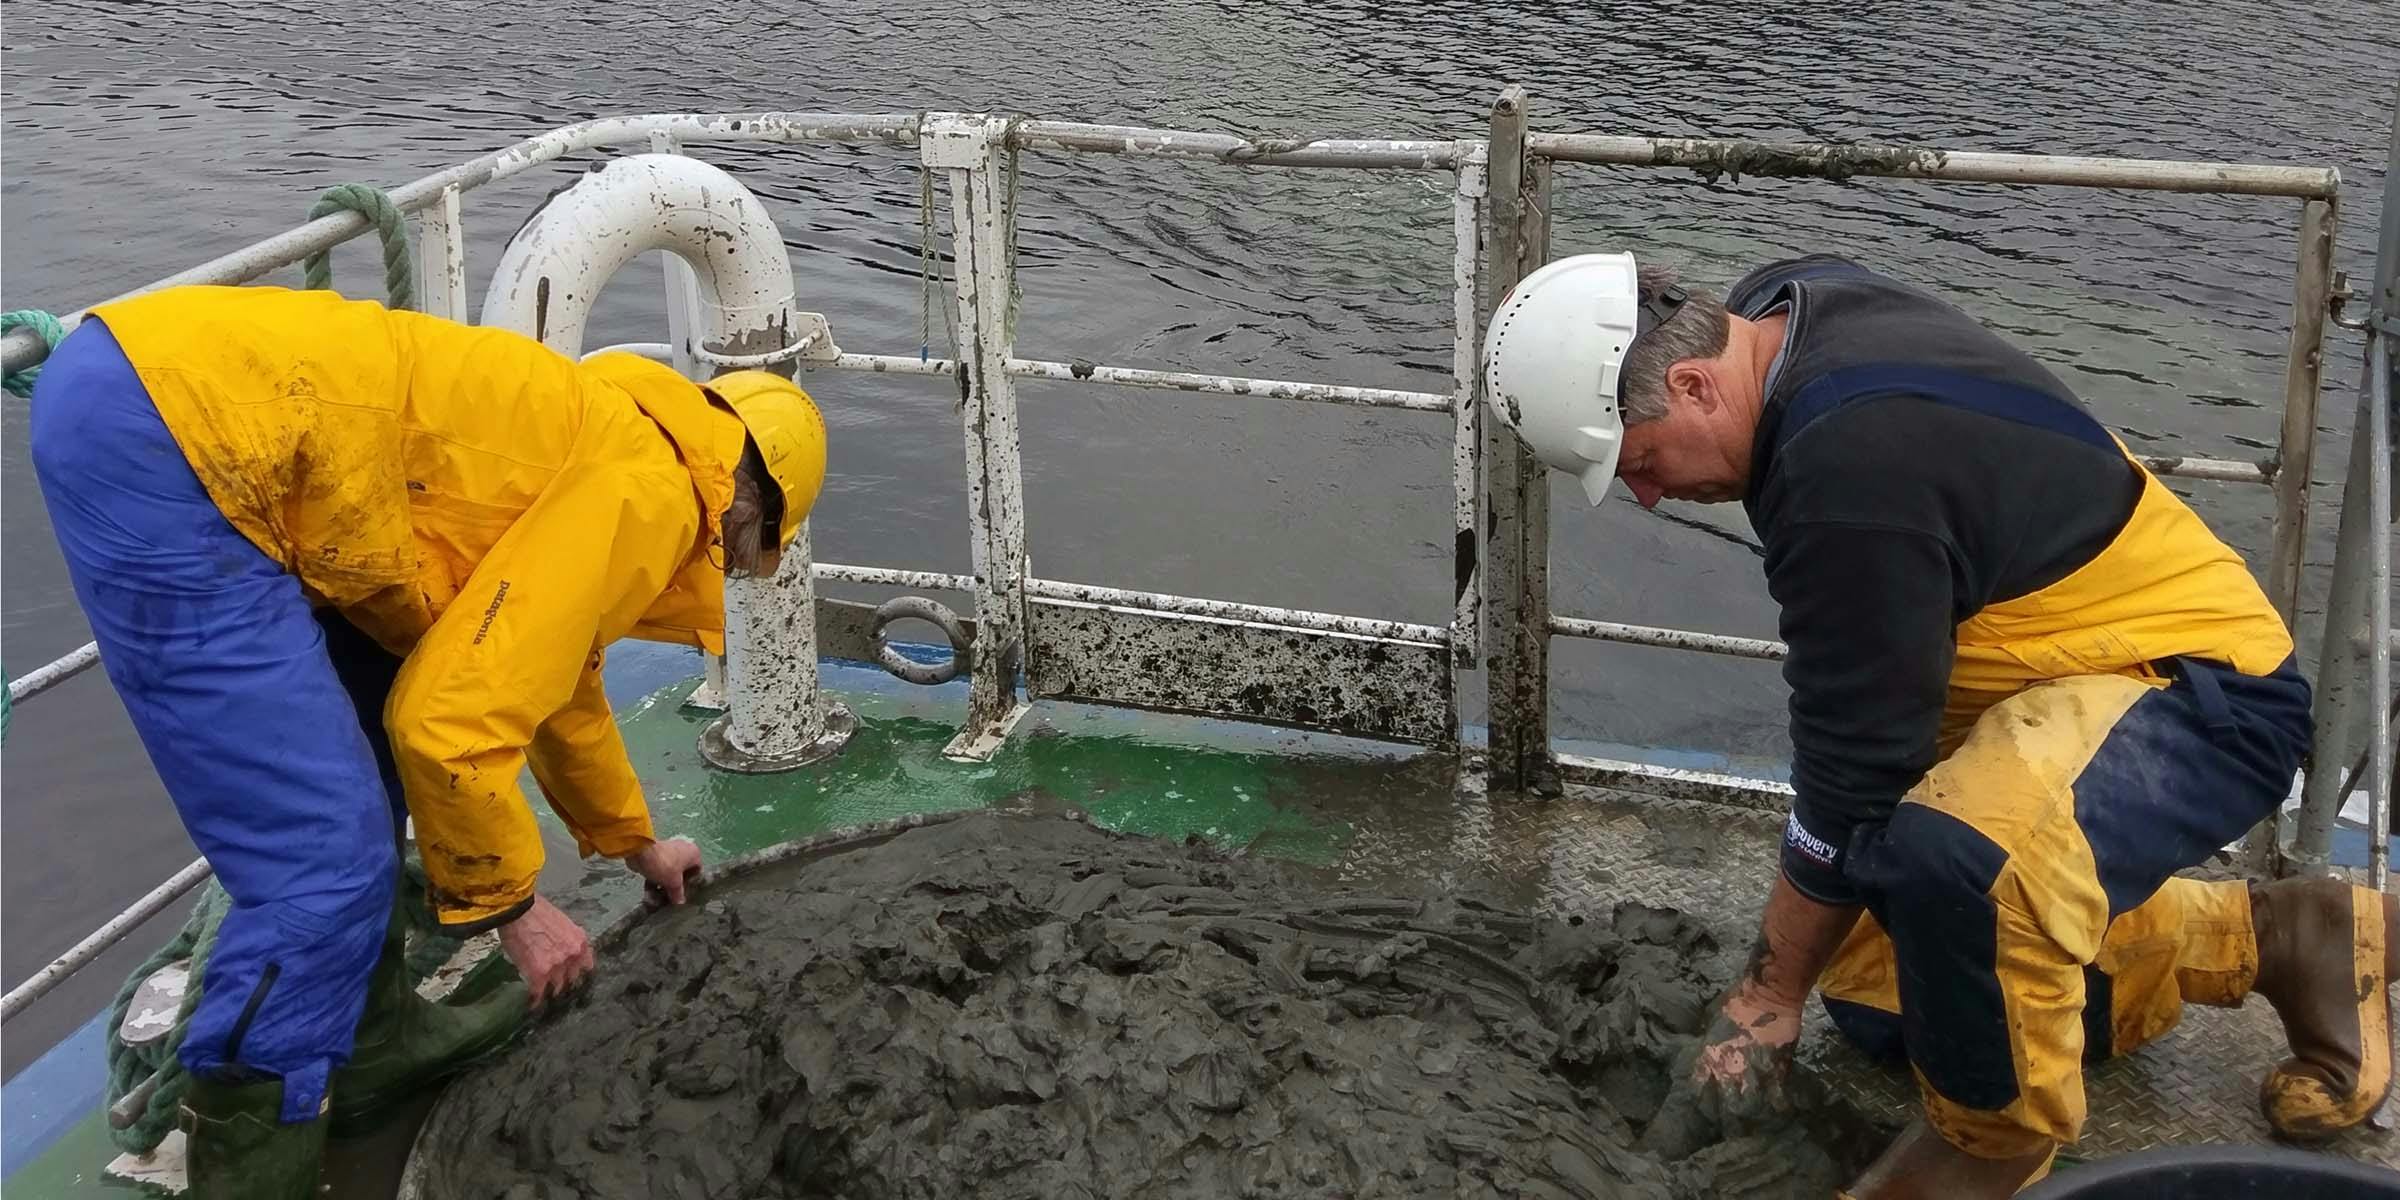 Two people wearing hard hats on a boat, leaning over and examining mud on the deck